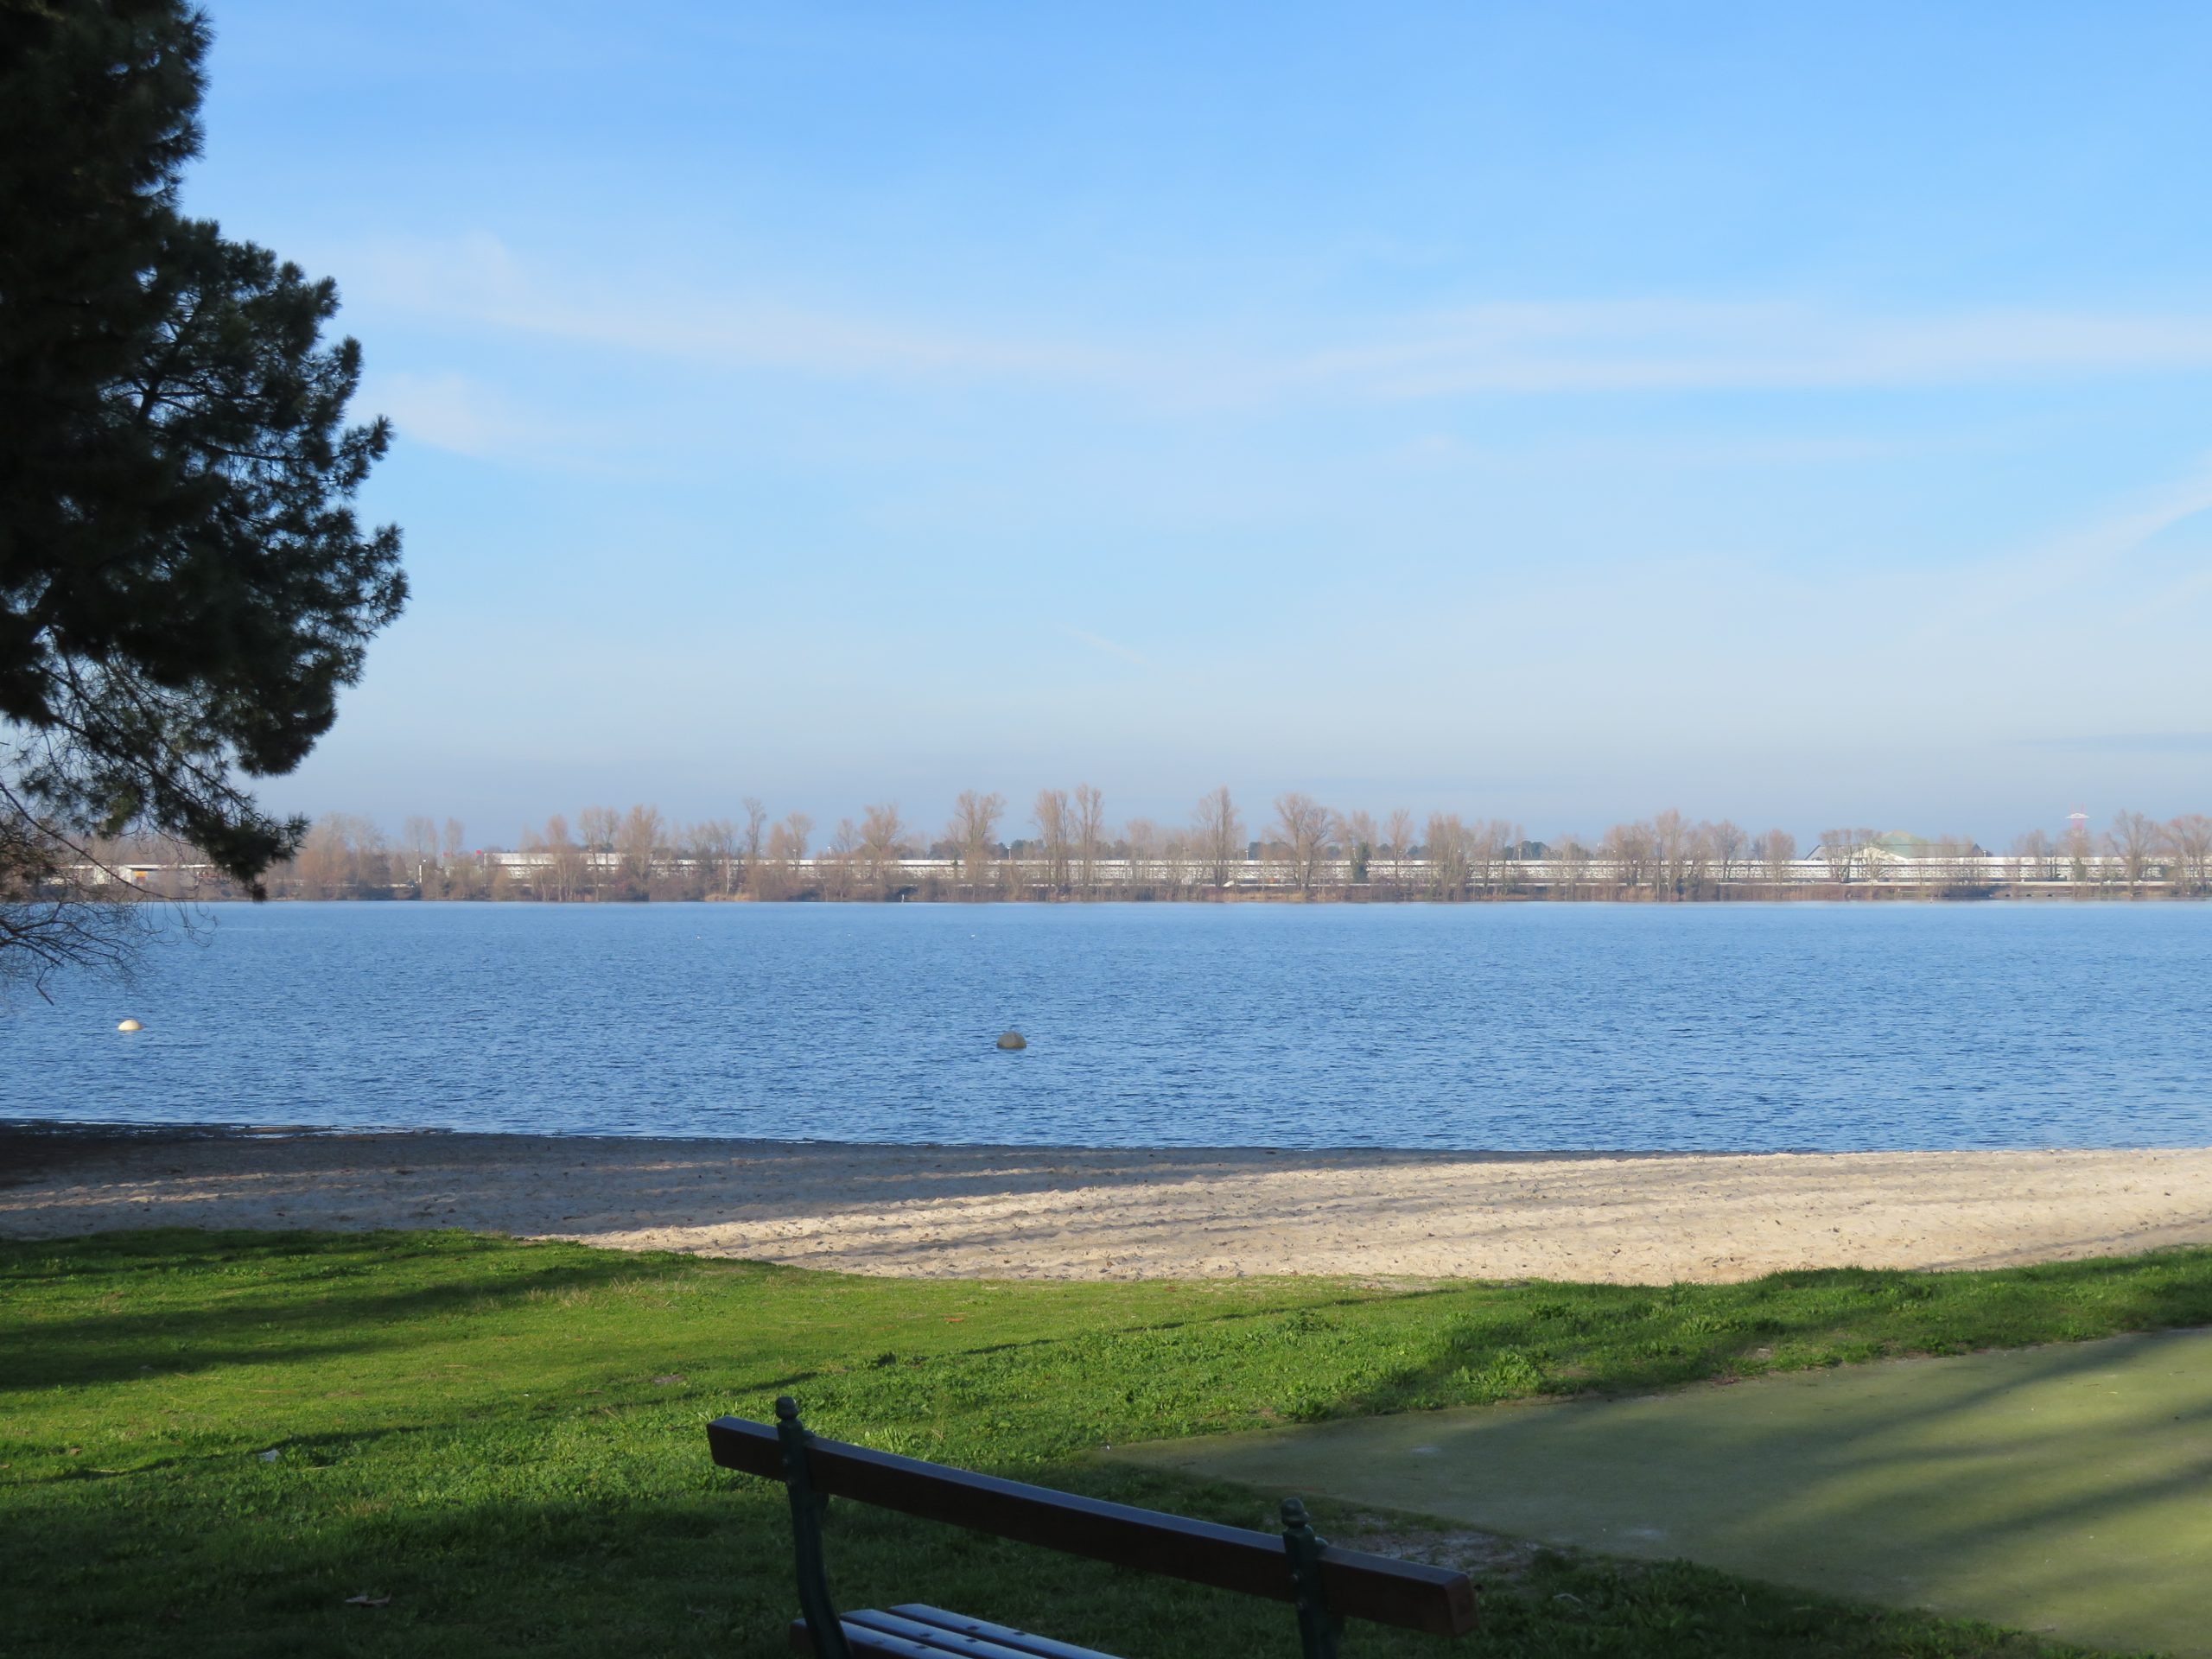 Roller ride: Around the lake of Bordeaux – IMPRATICABLE